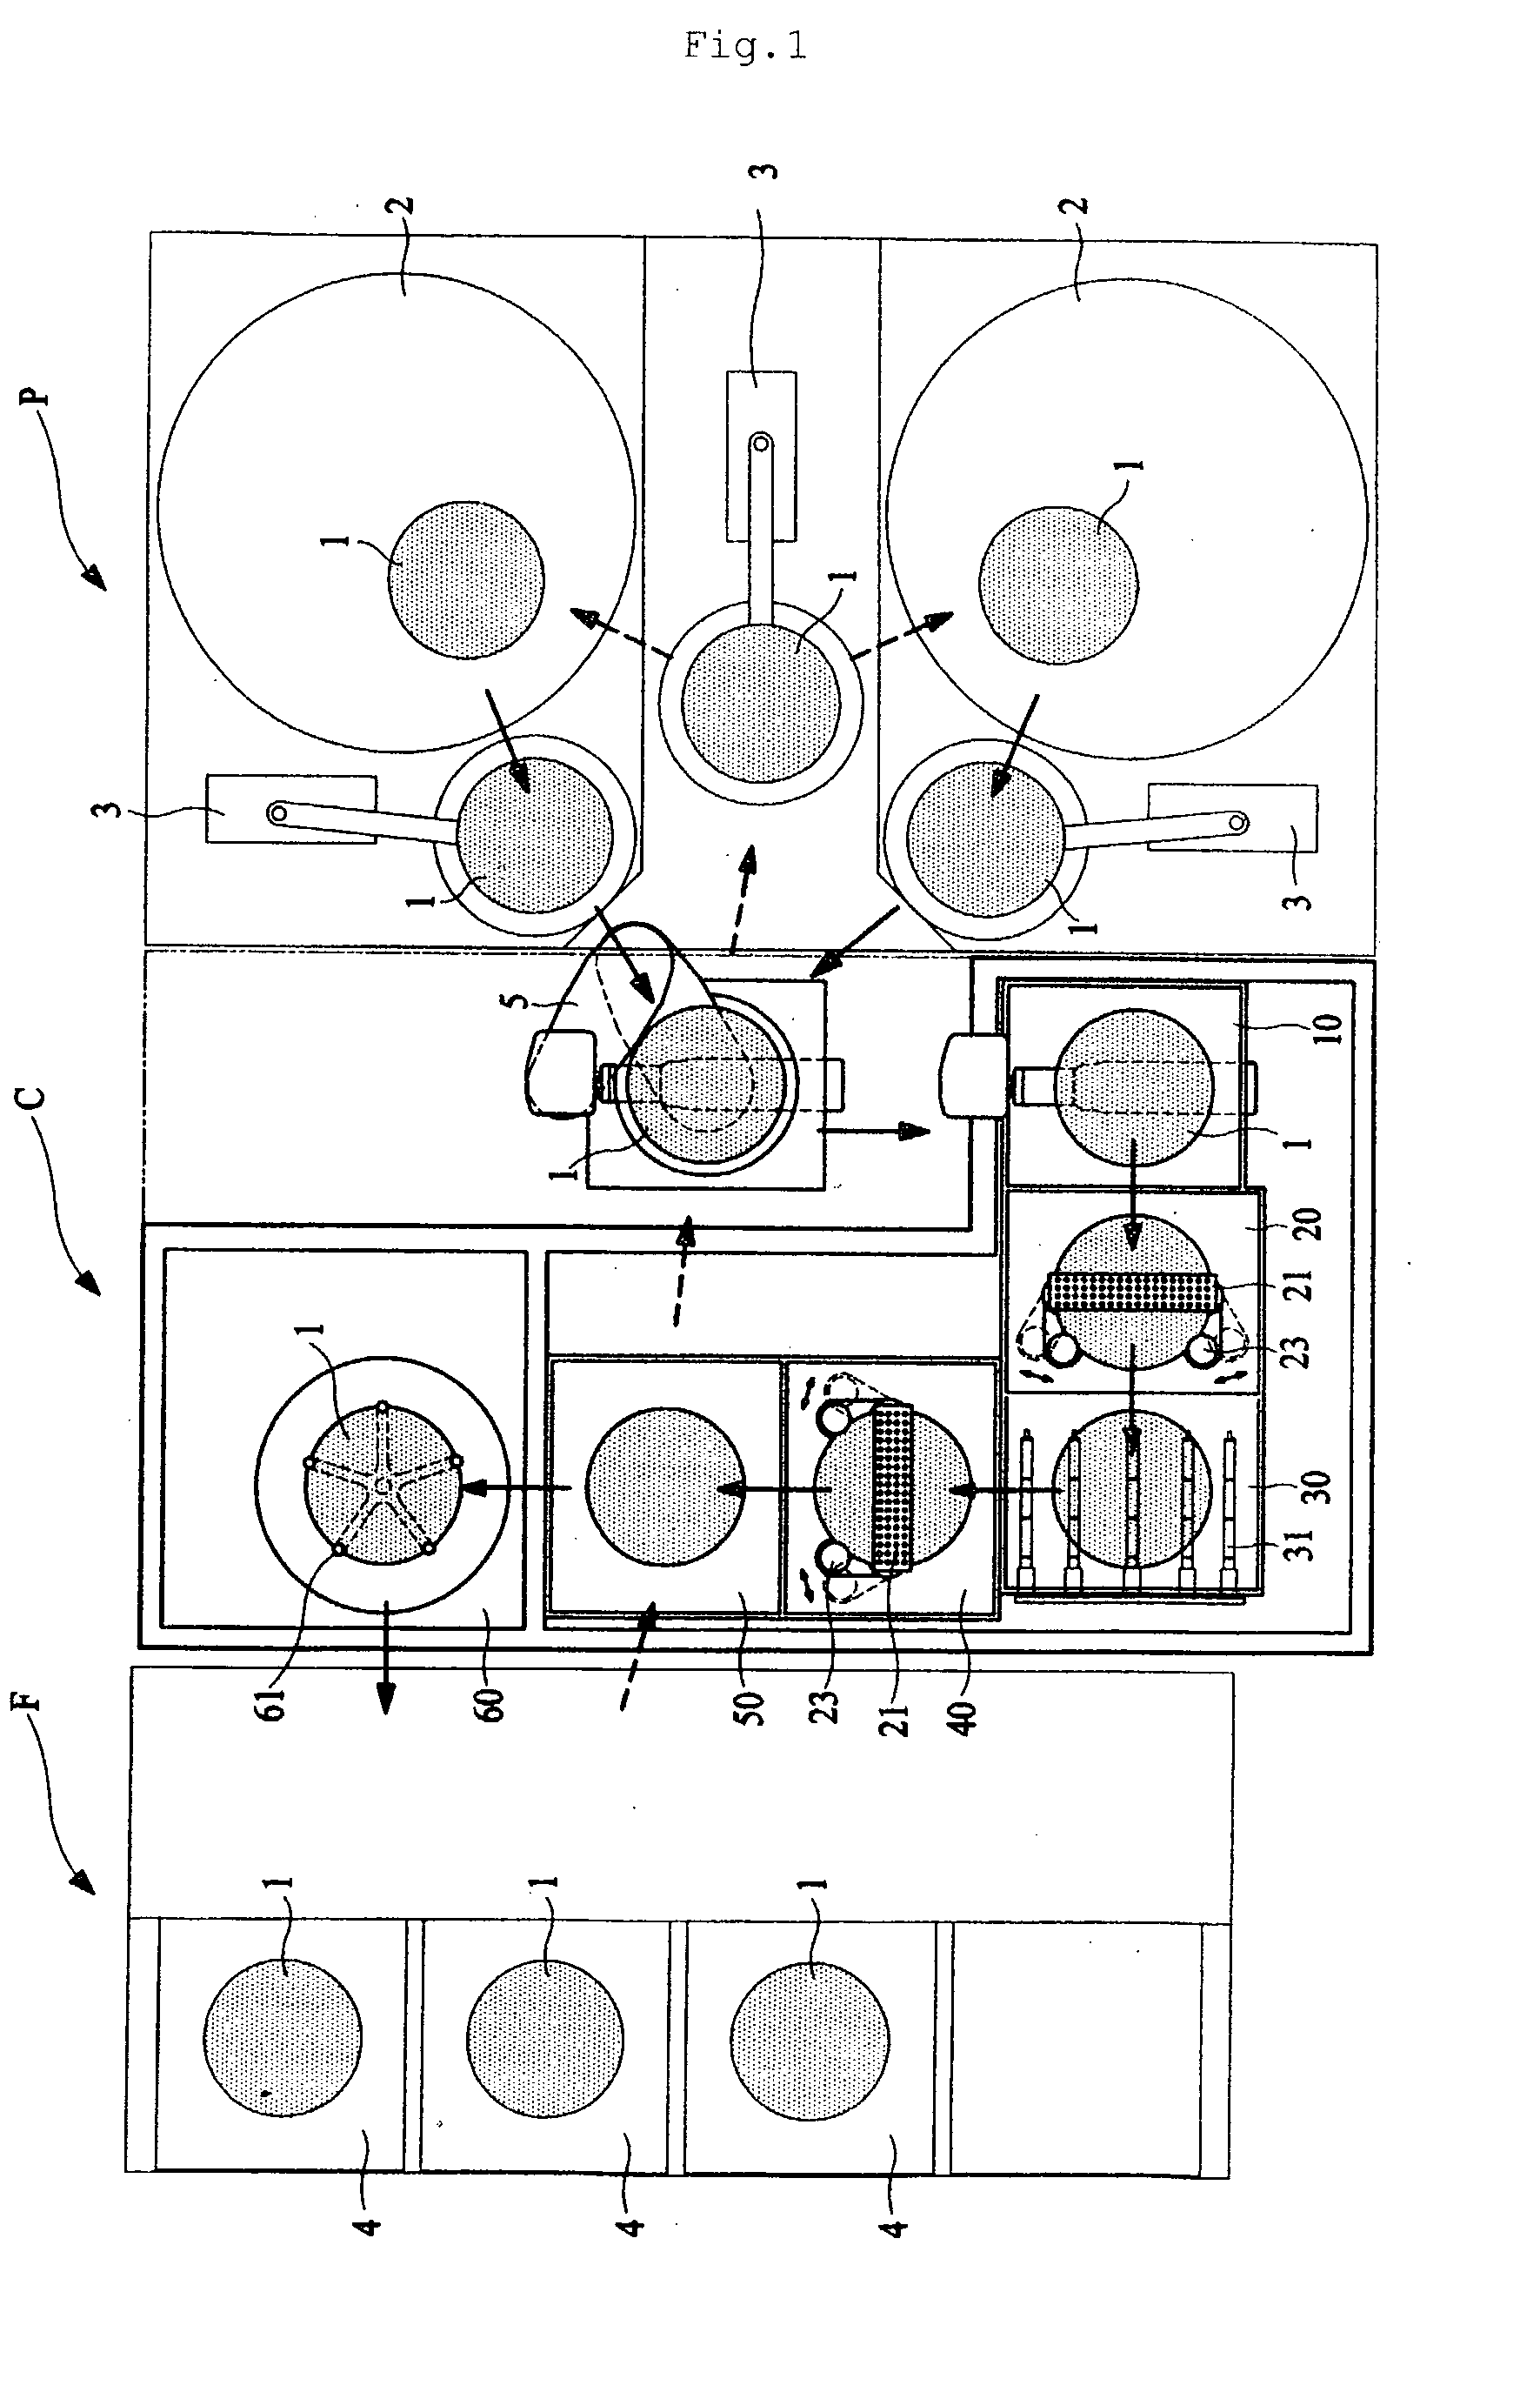 Semiconductor Wafer Cleaning System